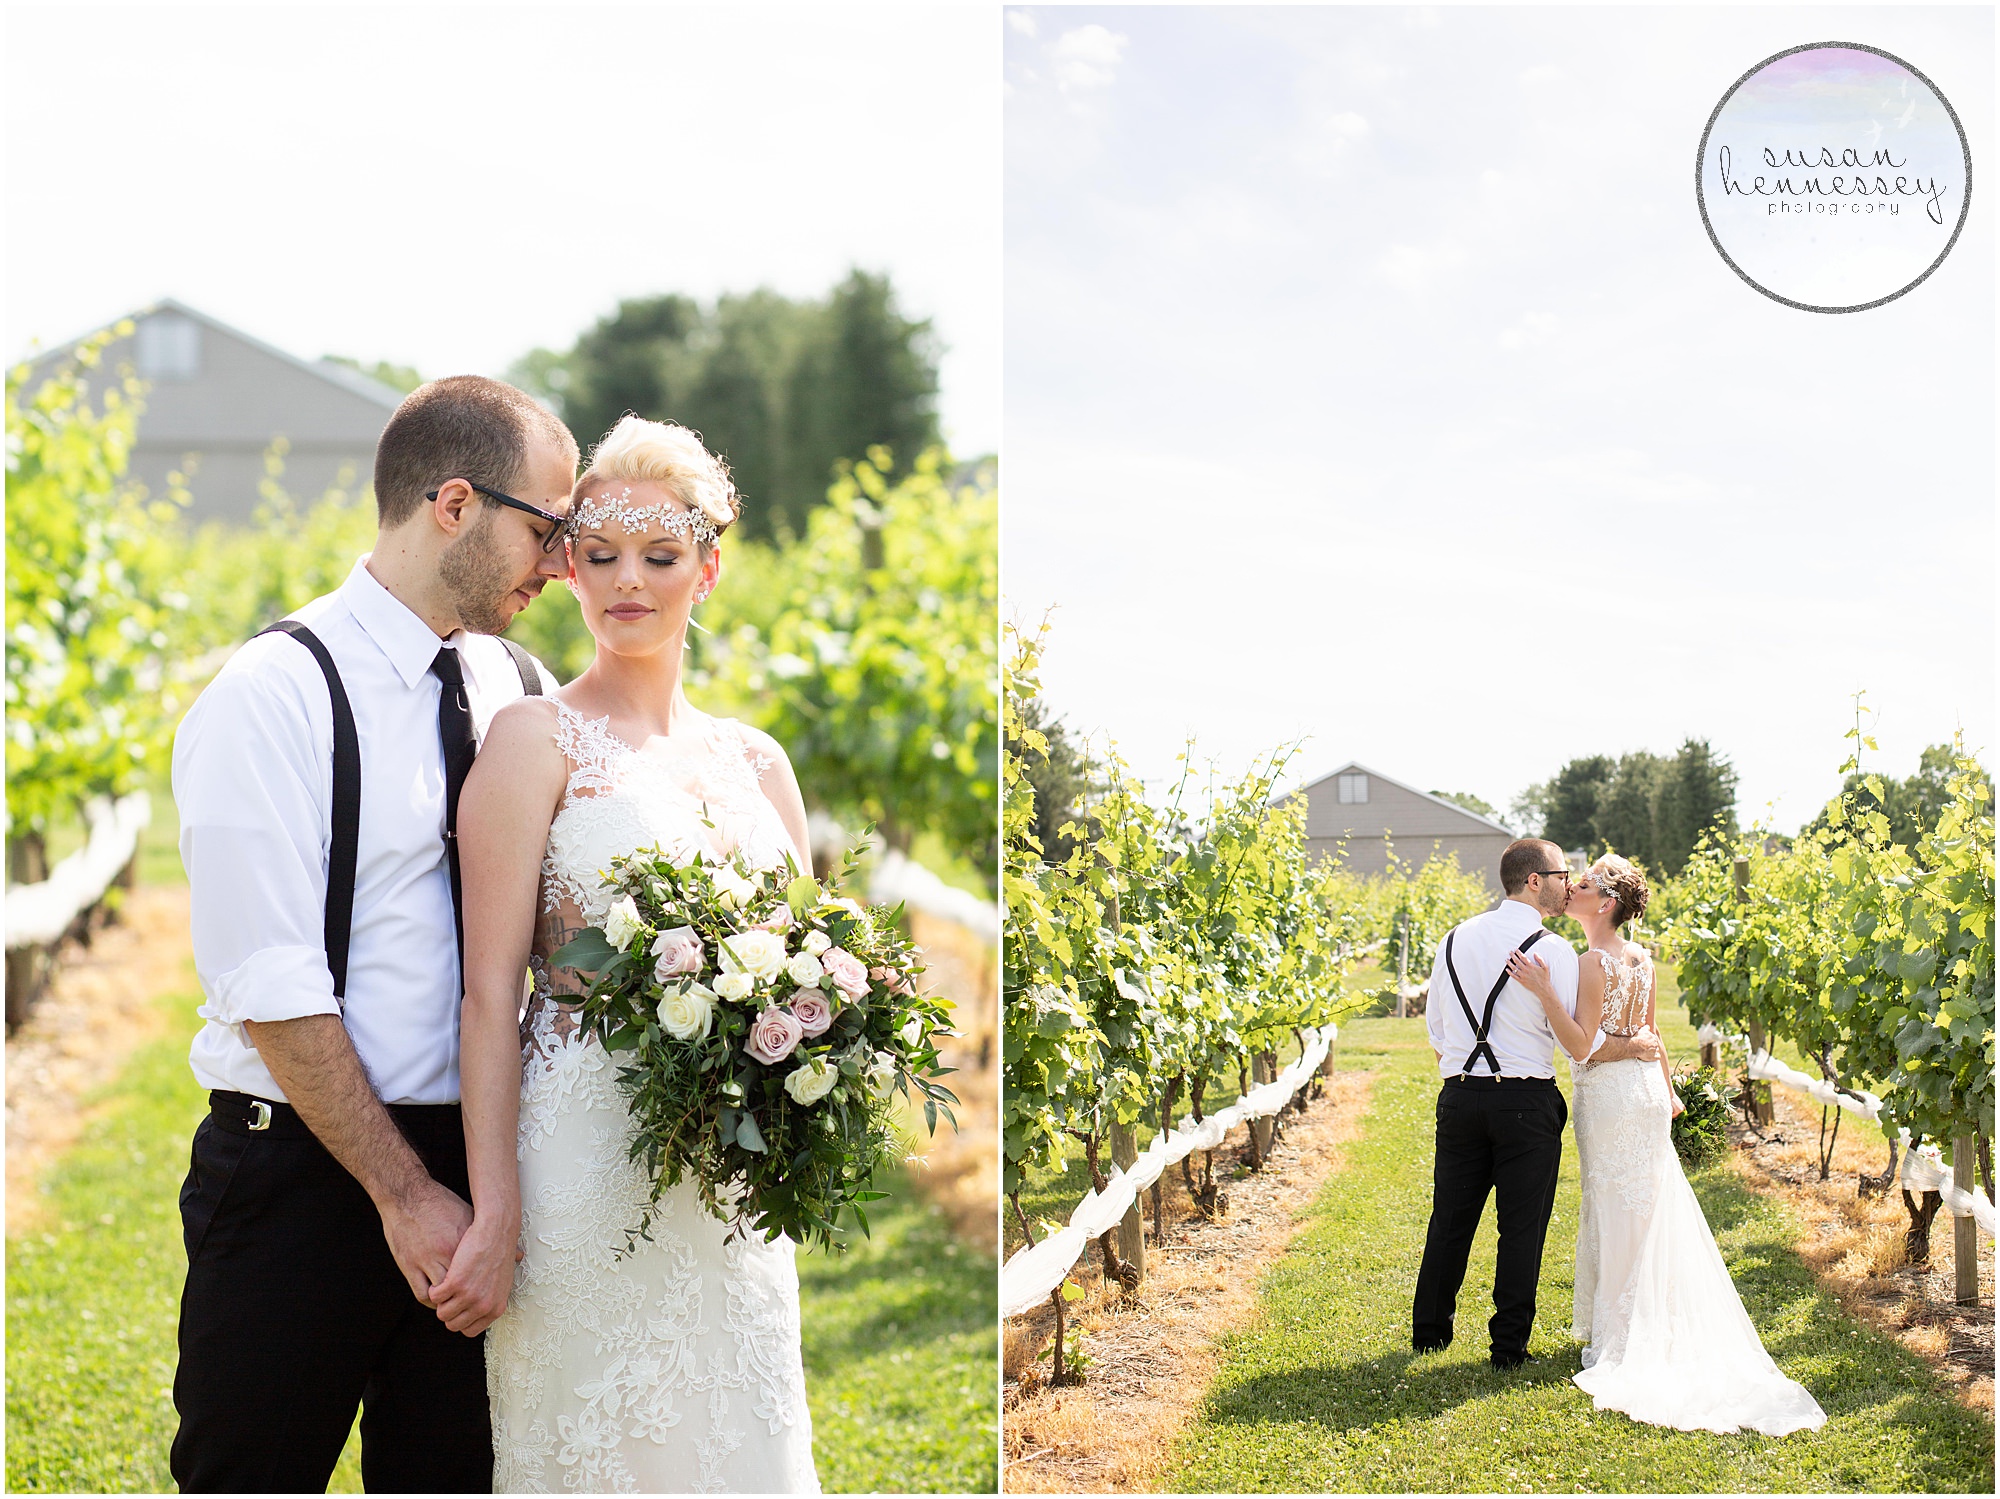 Romantic portraits of a bride and groom in the vineyards.